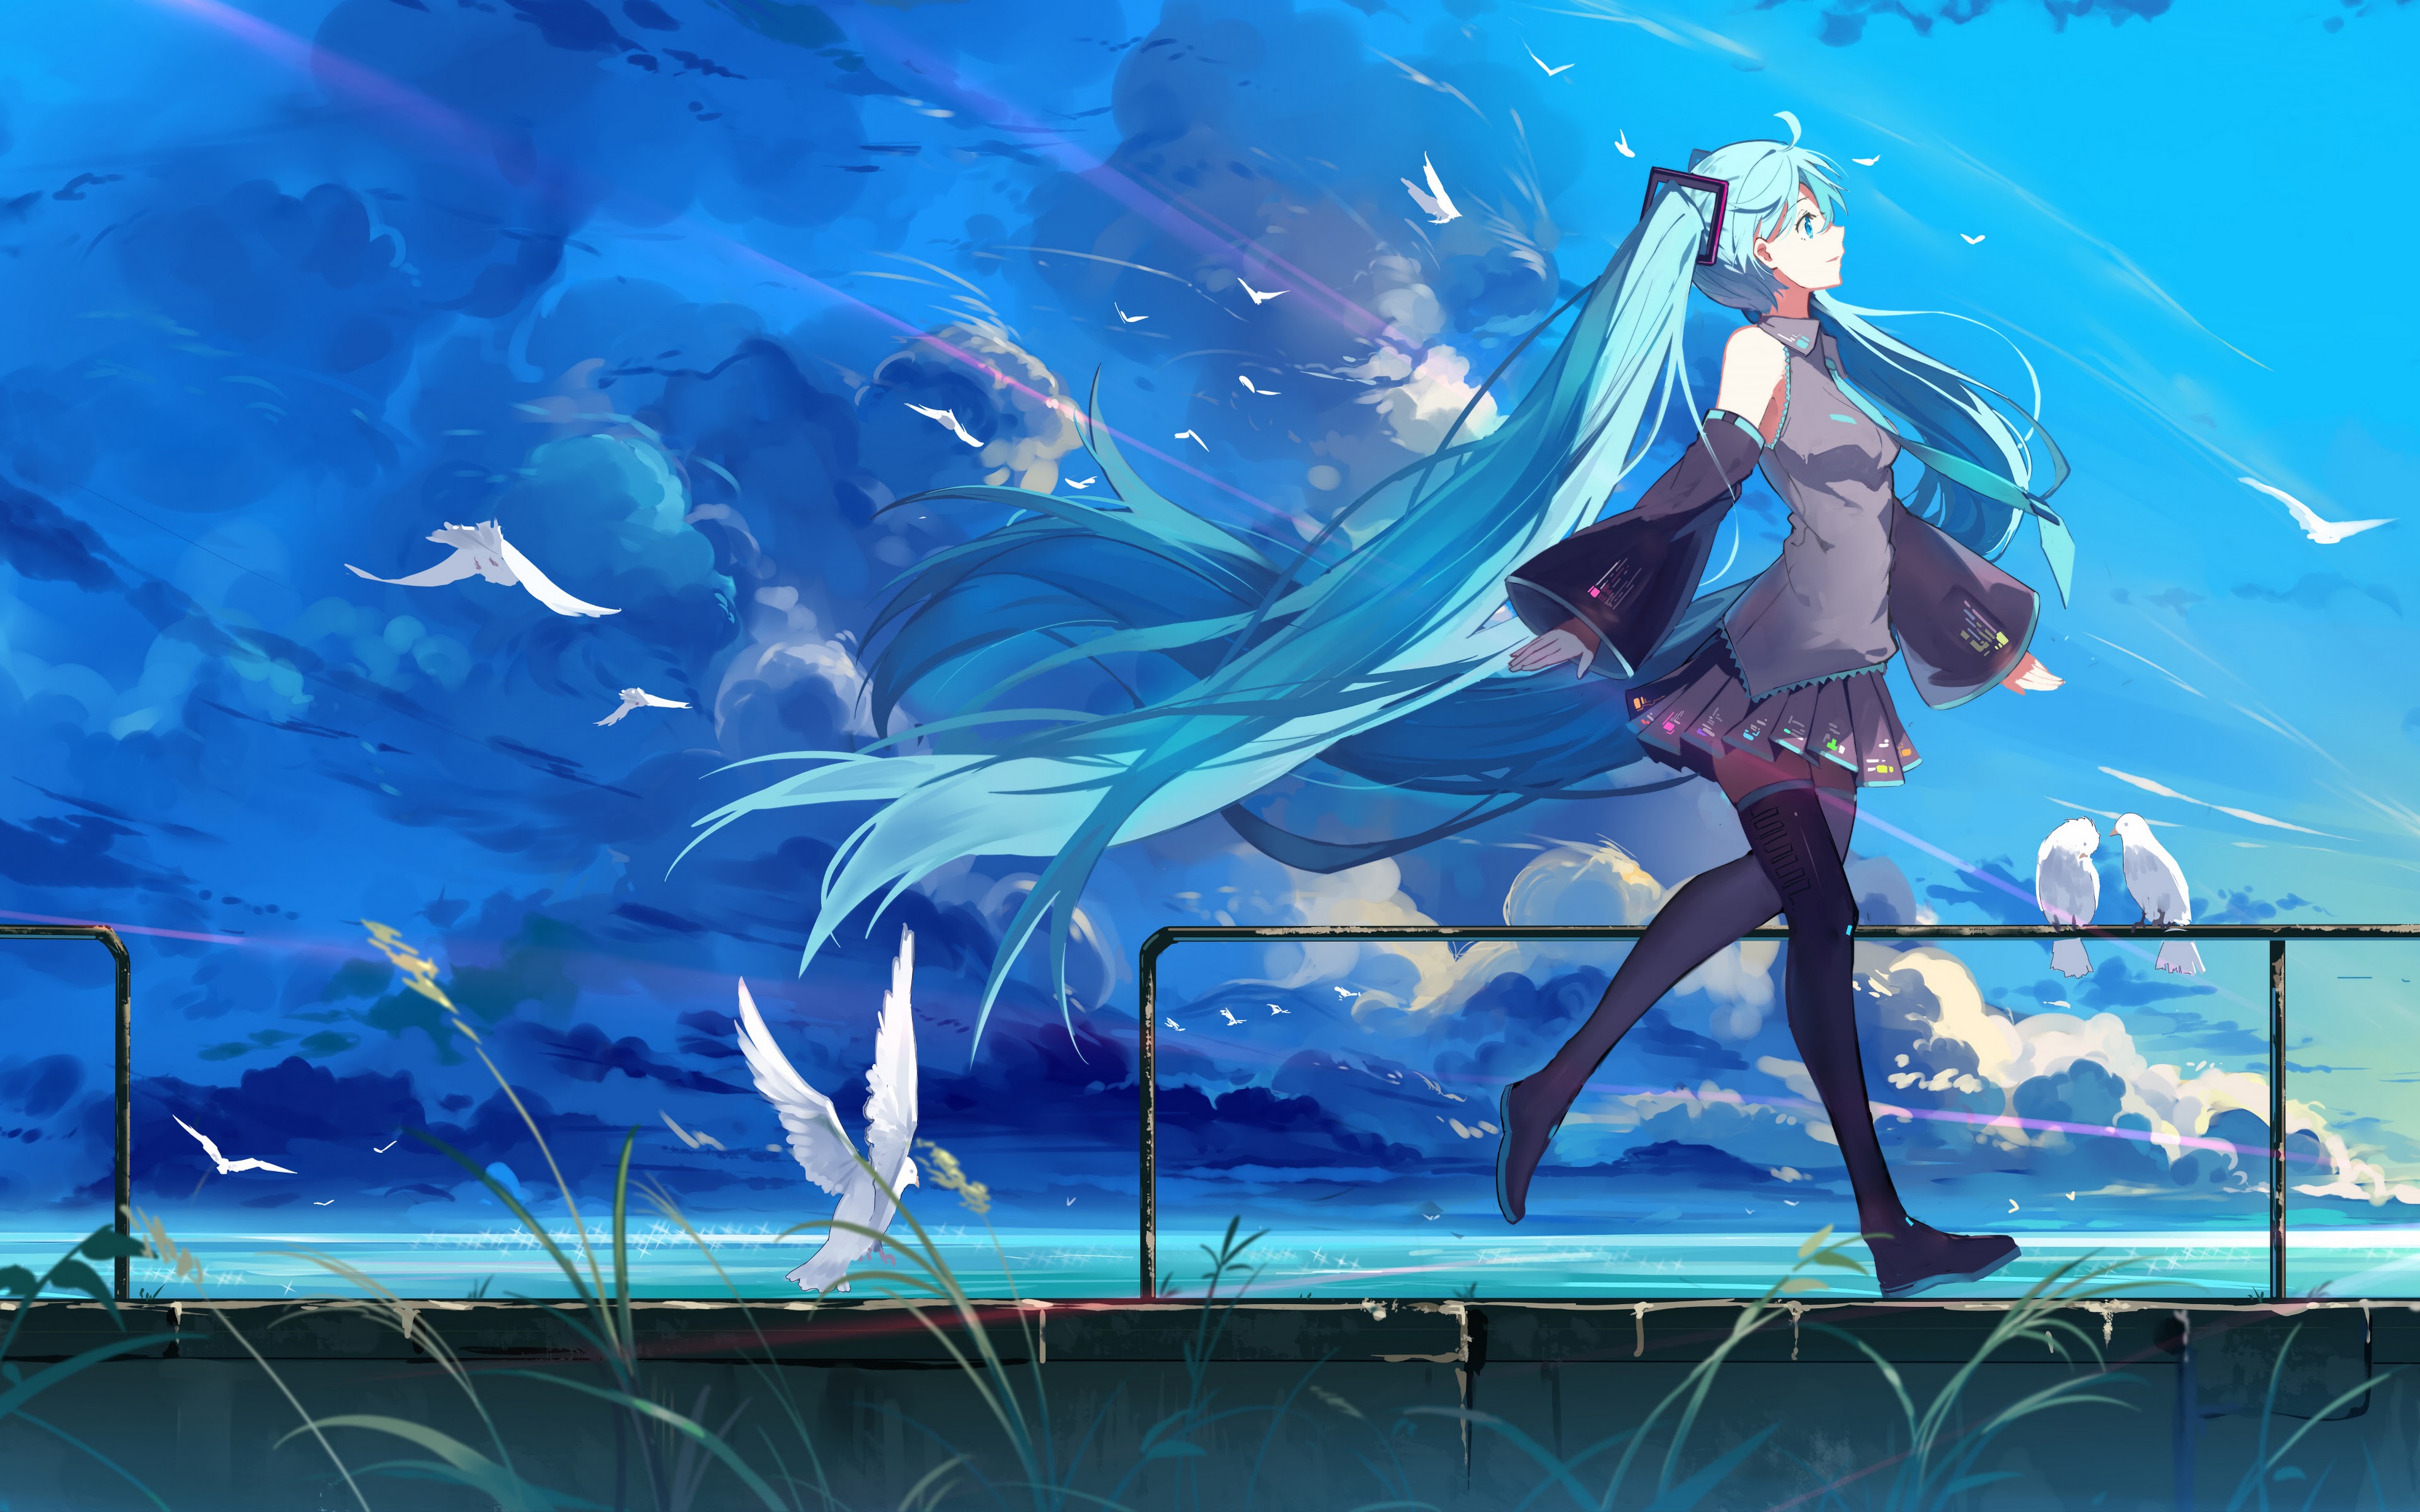 Download wallpaper 2048x1152 clouds sky anime dual wide 2048x1152 hd  background 24784